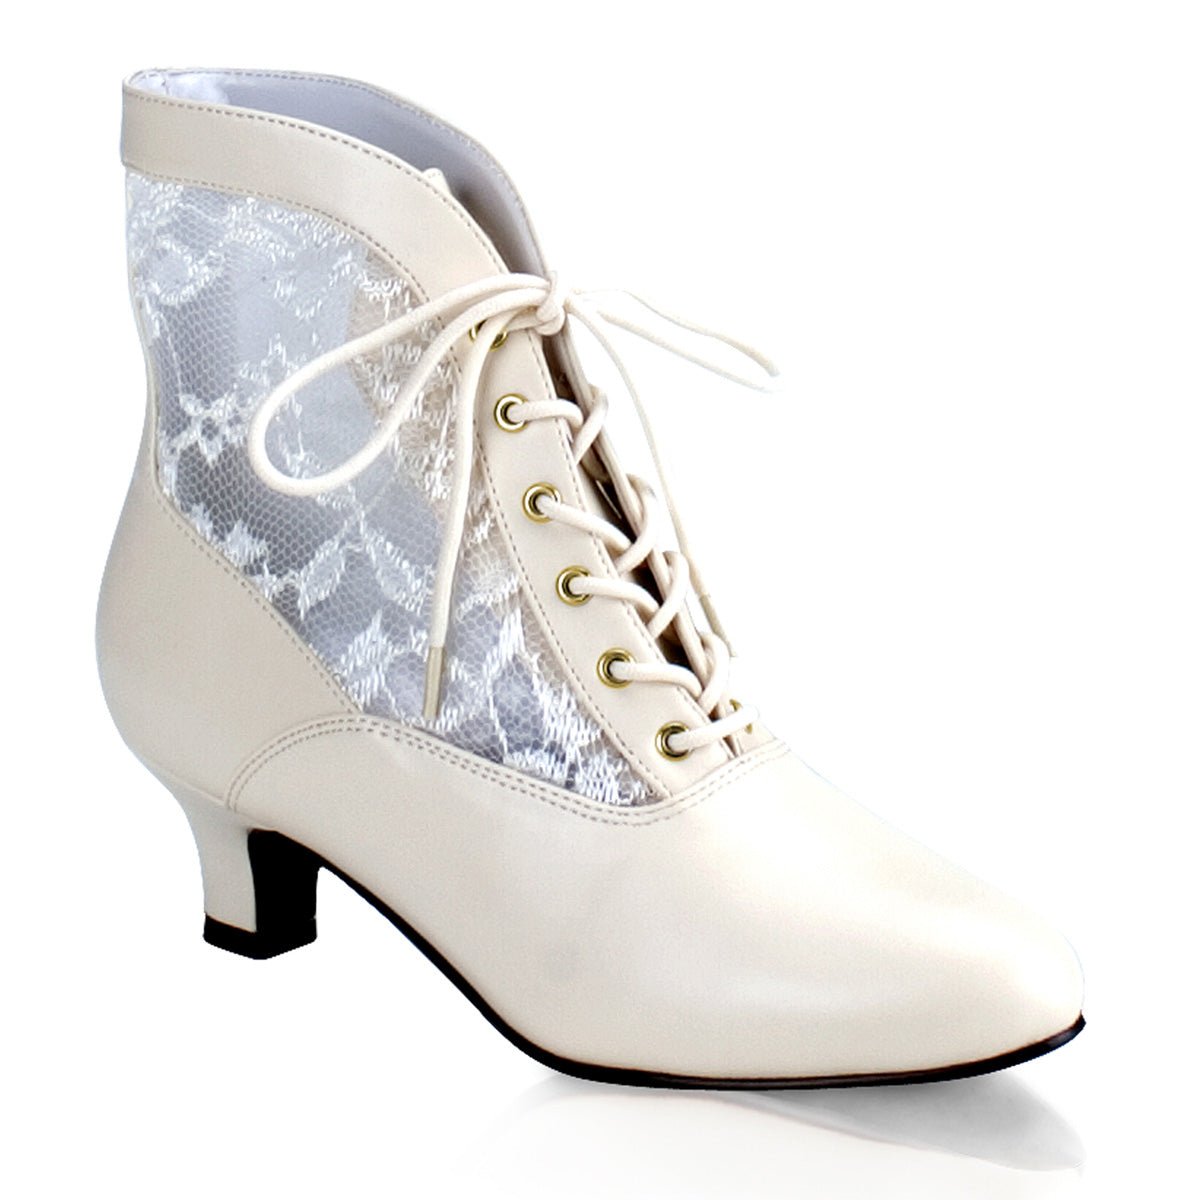 Clearance Funtasma DAME 05 Ivory Size 3UK/6USA - From Clearance Sold By Alternative Footwear